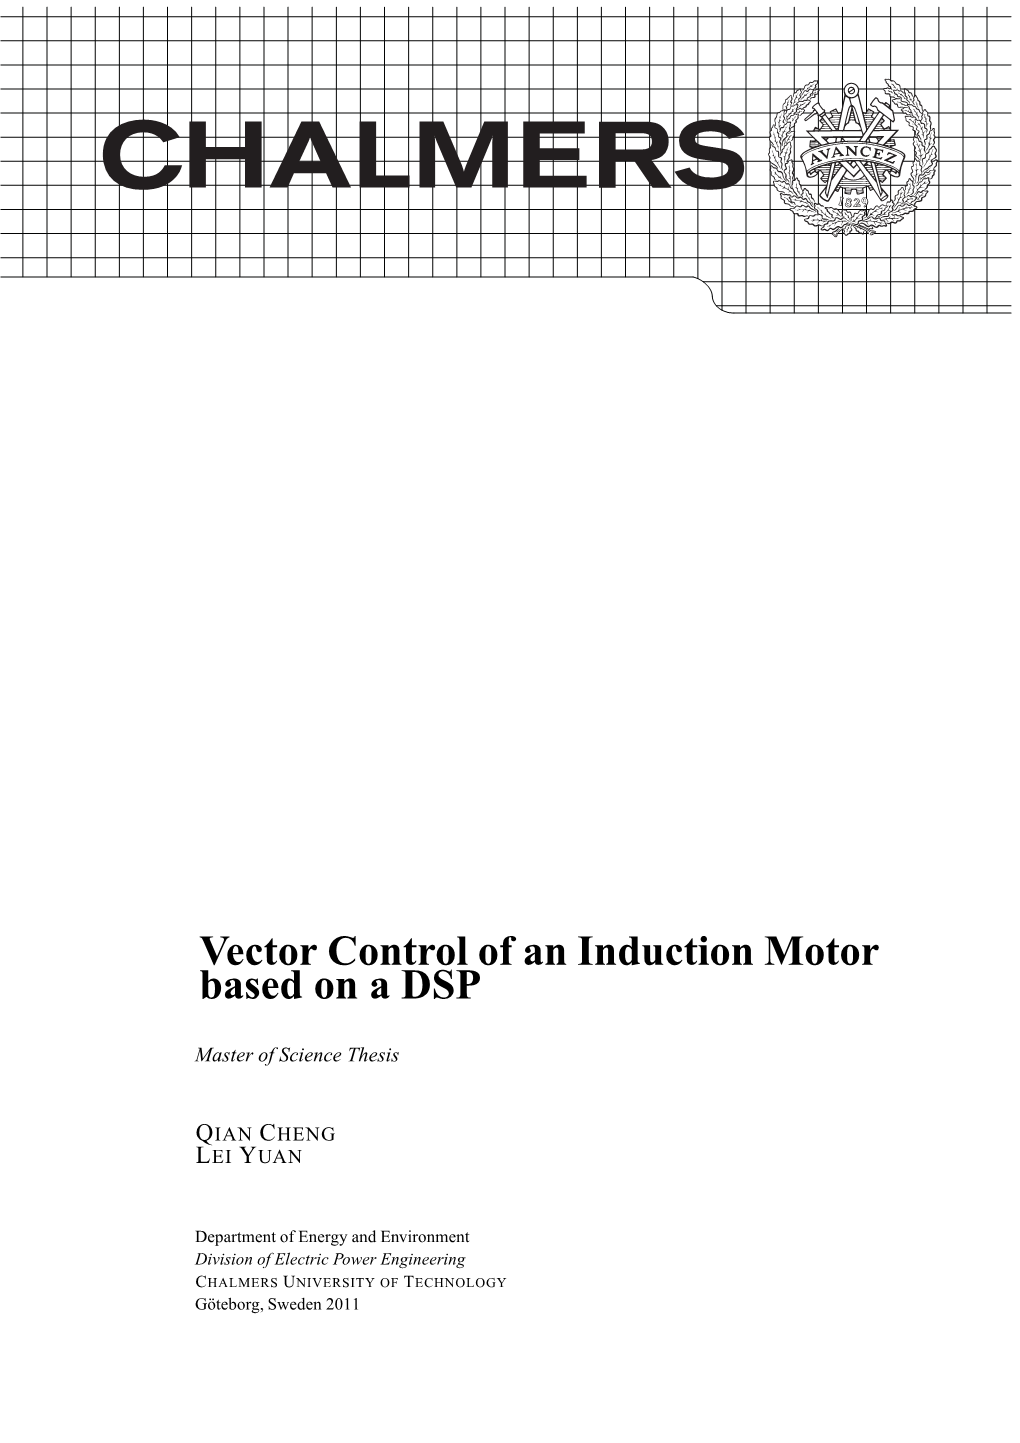 Vector Control of an Induction Motor Based on a DSP